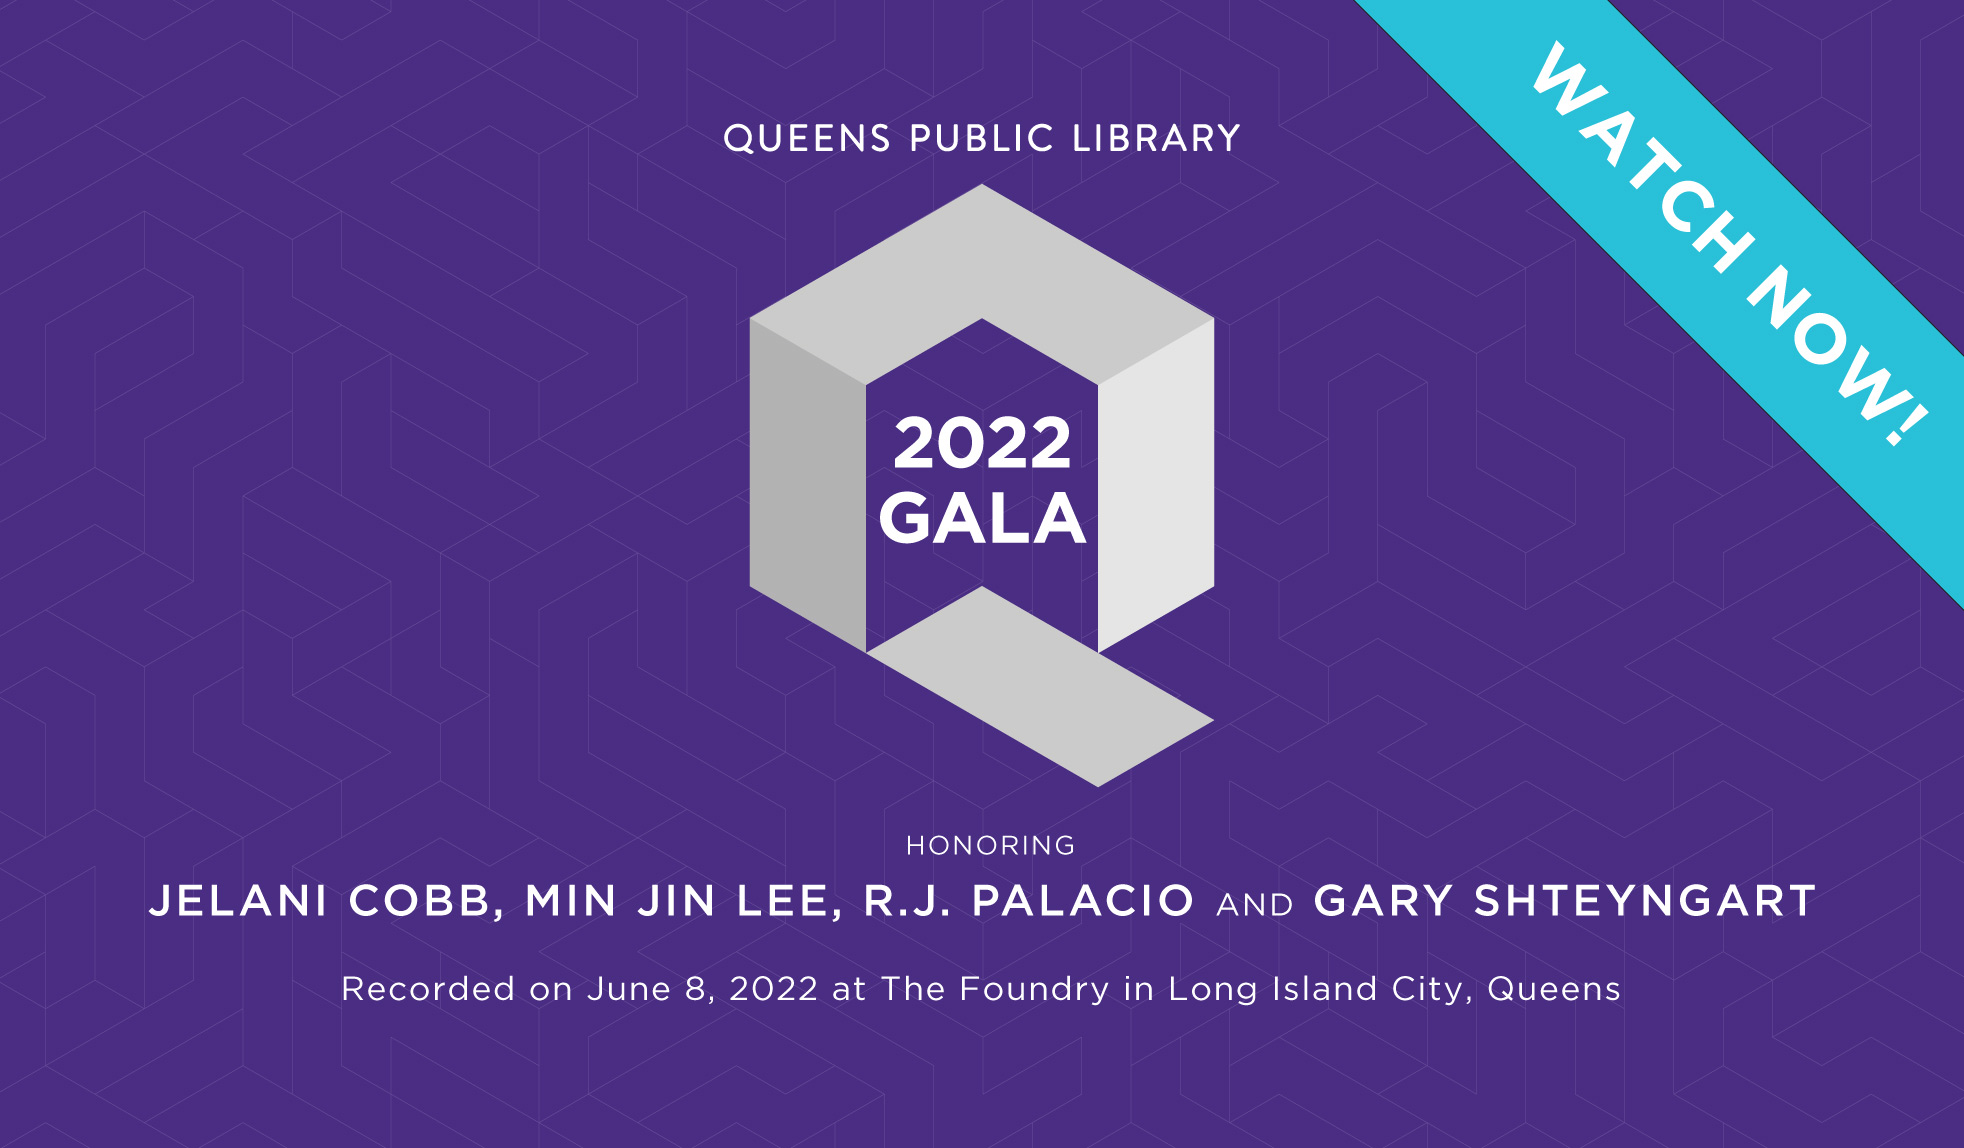 We are pleased to share a virtual presentation of the 2022 Gala, streaming now on our website.